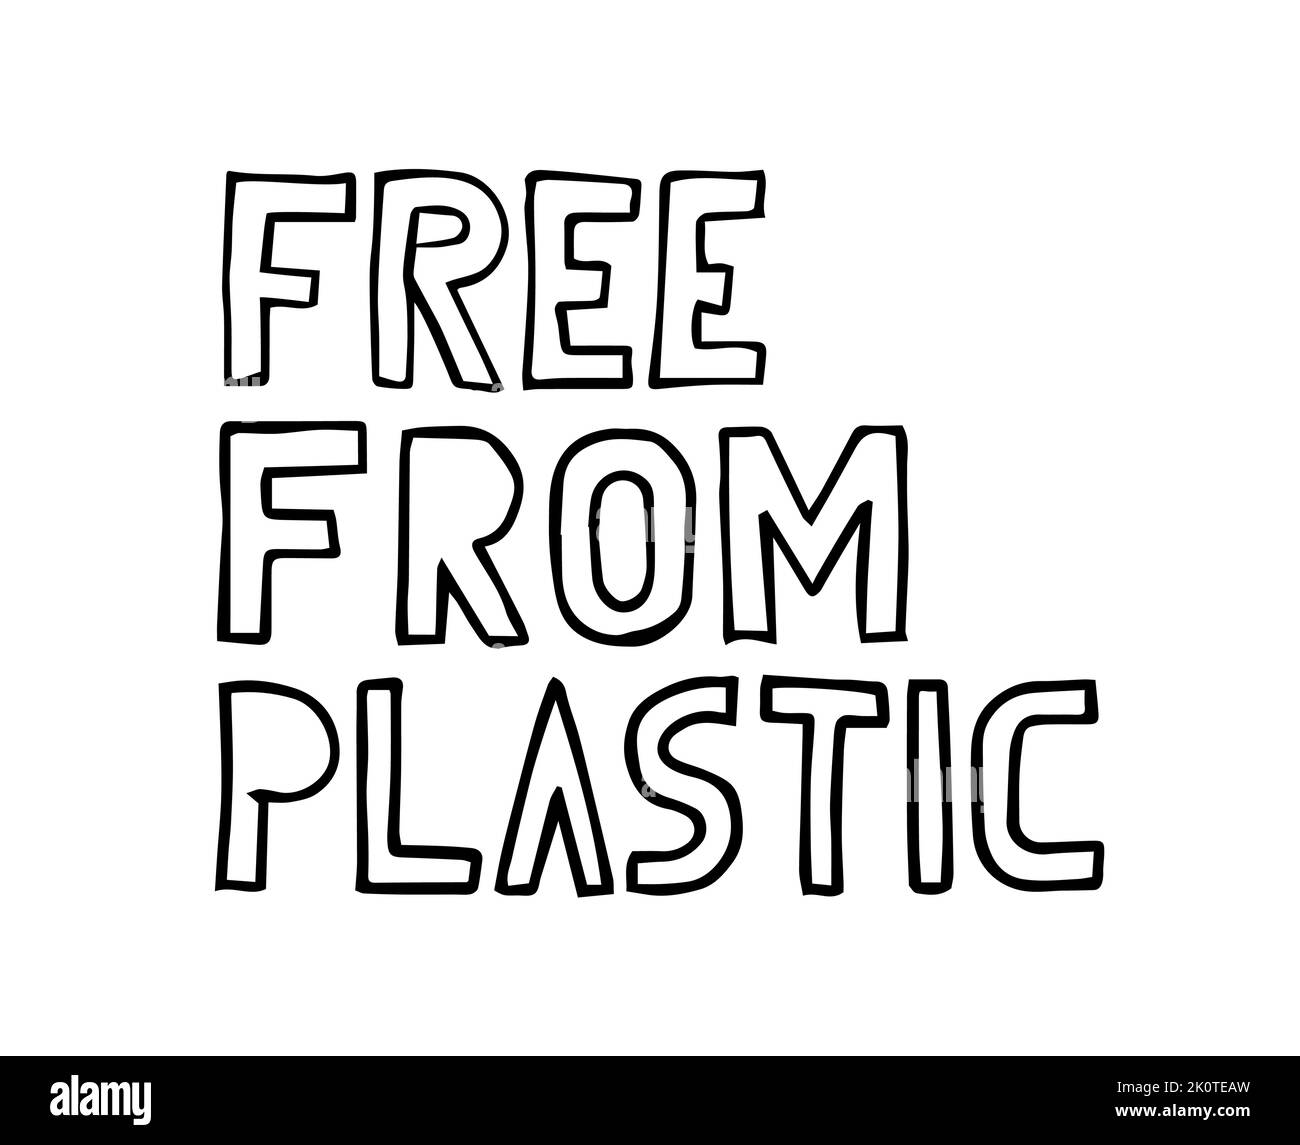 Free from plastic lettering for package paper design. Zero waste concept. Plastic pollution sticker label. Stock Vector